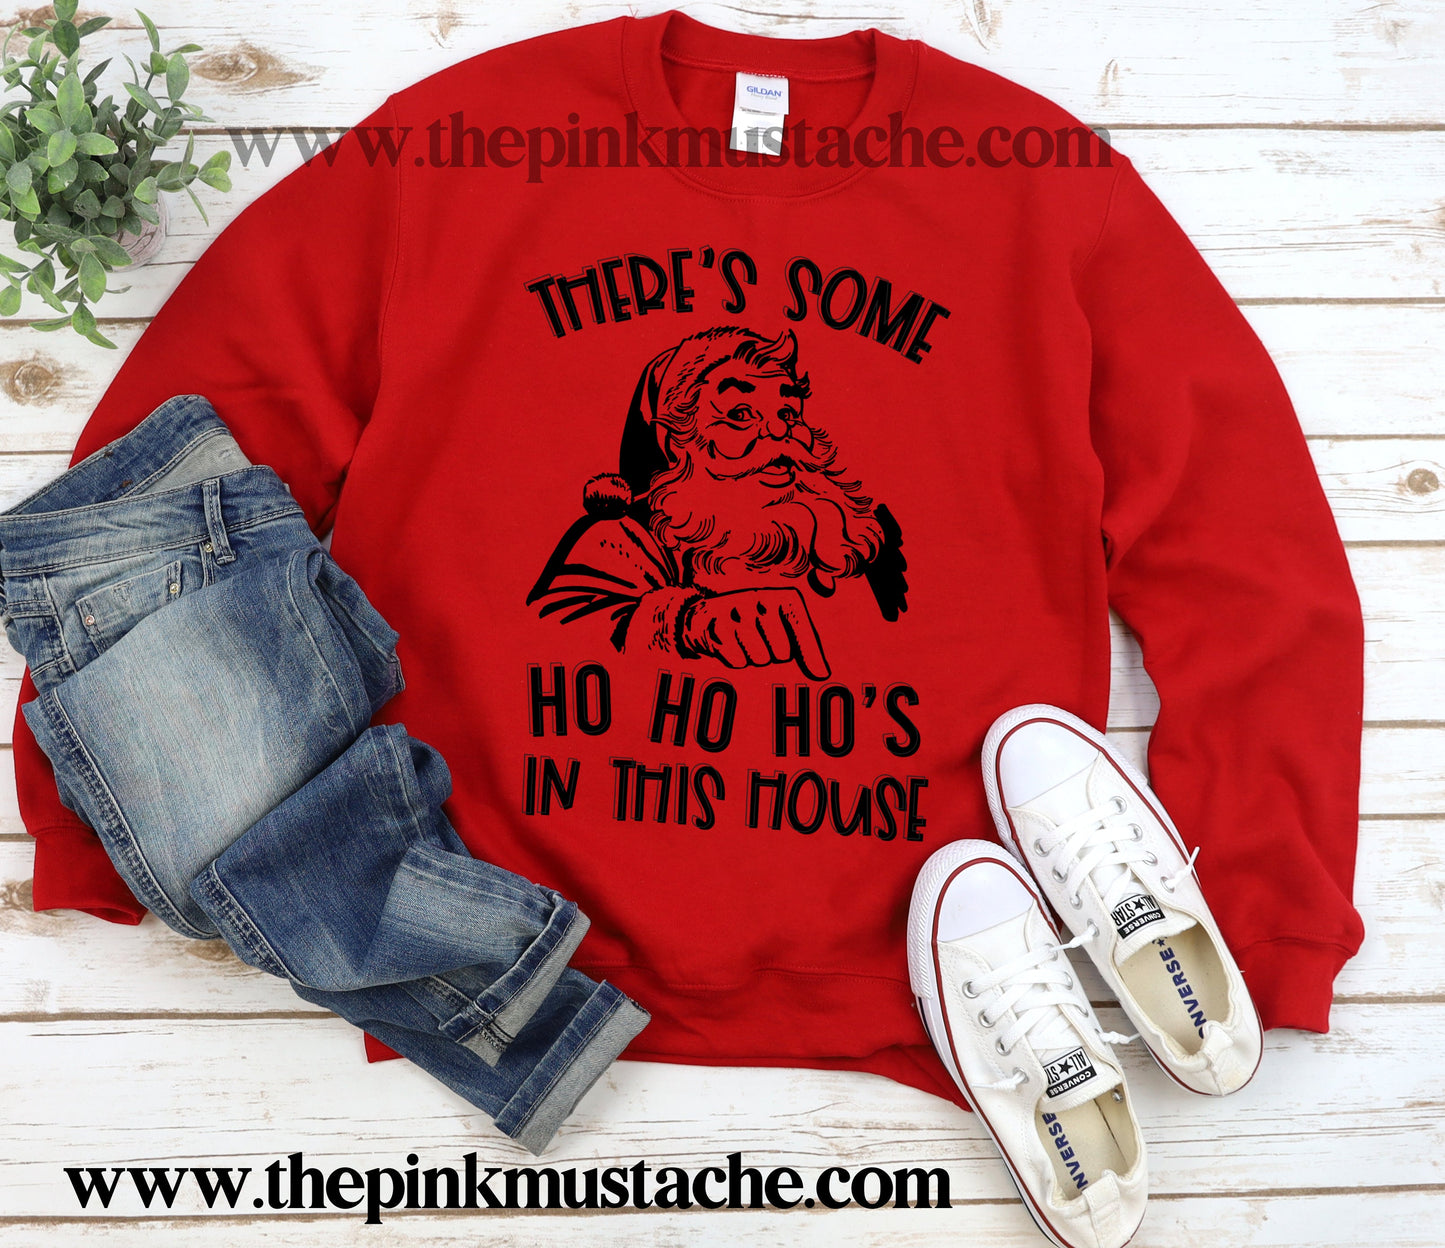 There's Some Ho Ho Ho's In This House Christmas Funny Sweatshirt /Funny Oversized Sweatshirt - SALE